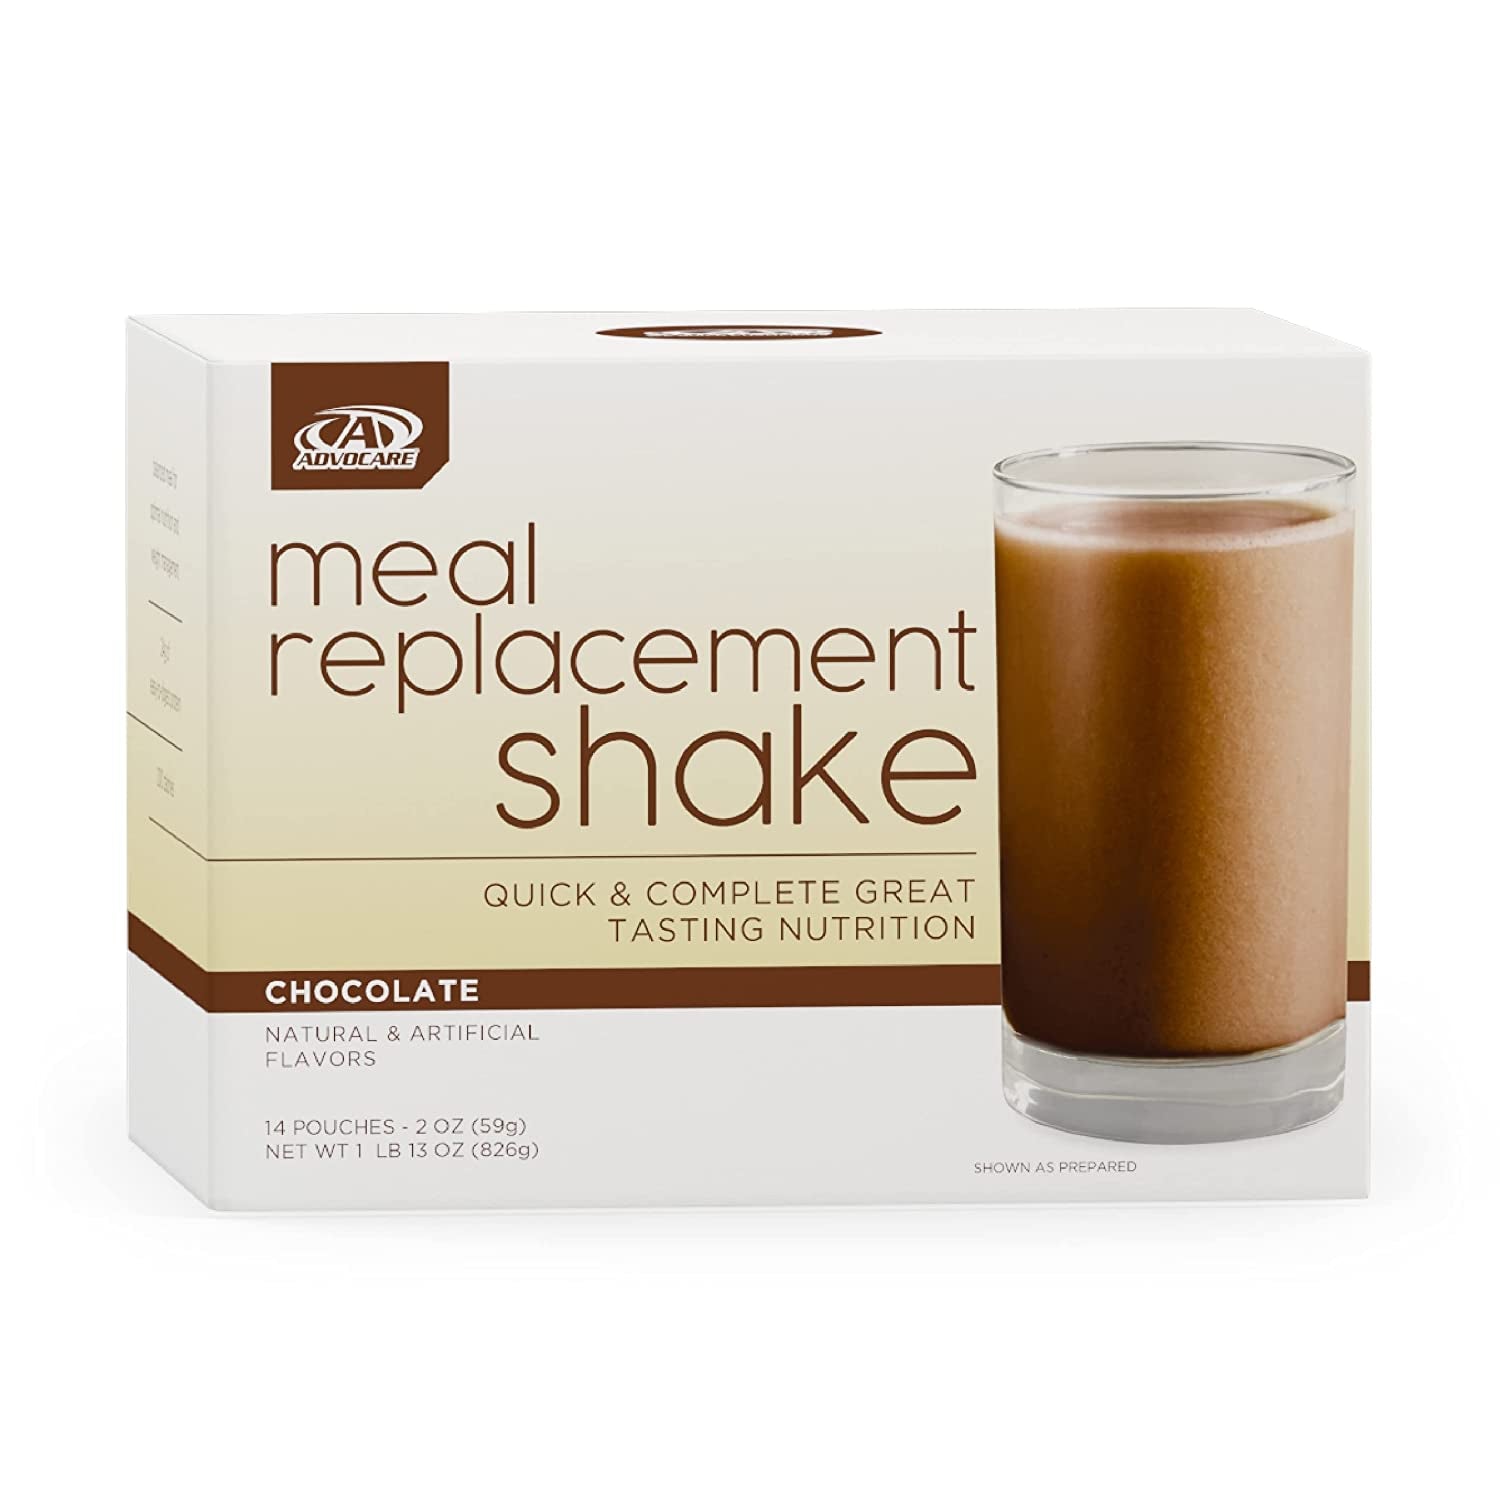 Advocare Meal Replacement Shake - Protein Shakes - Liquid Meal Supplement - Advocare Meal Replacement Shakes - Convenient Meal Drink - Chocolate Flavor - 14 Pouches